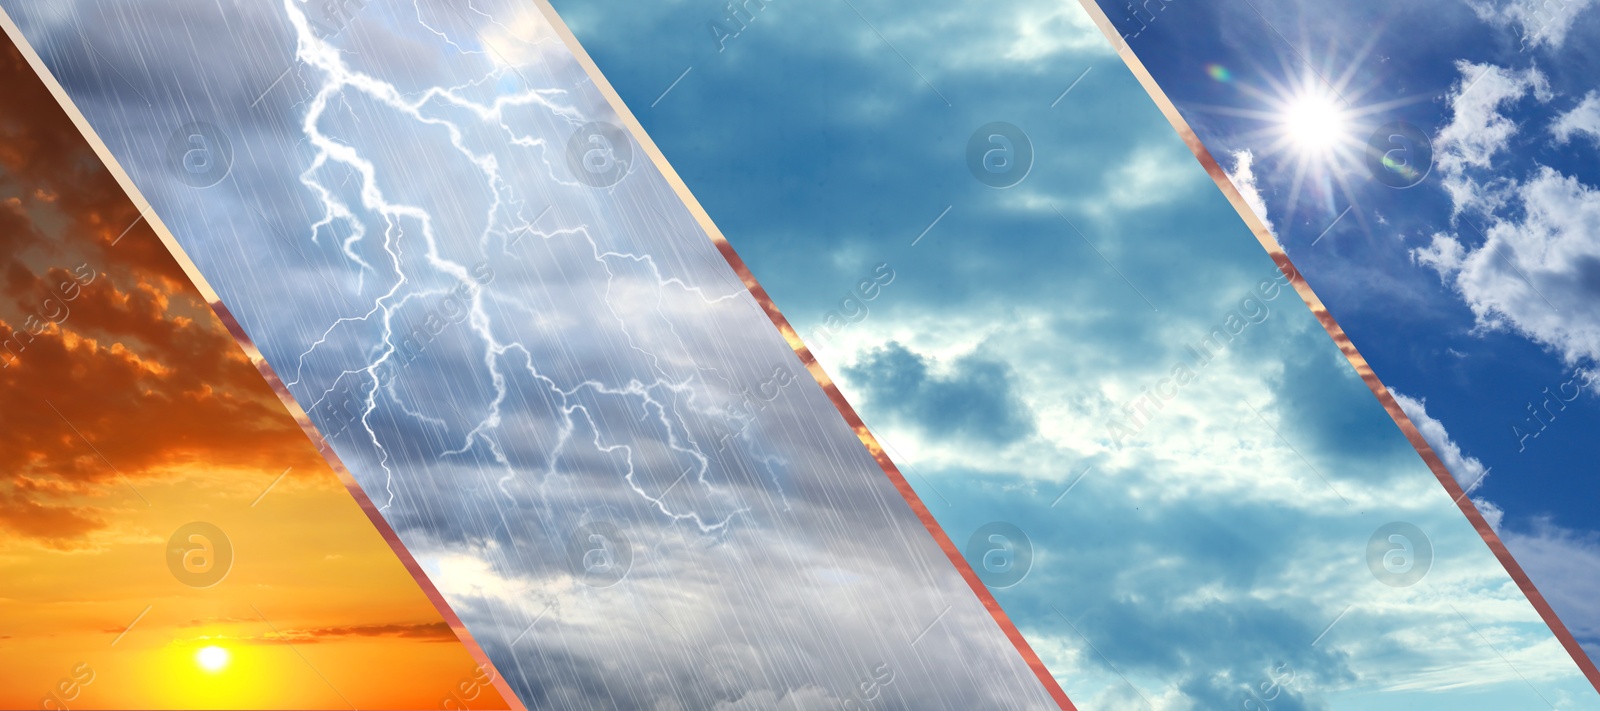 Image of Forecast concept. Collage of photos with different weather conditions